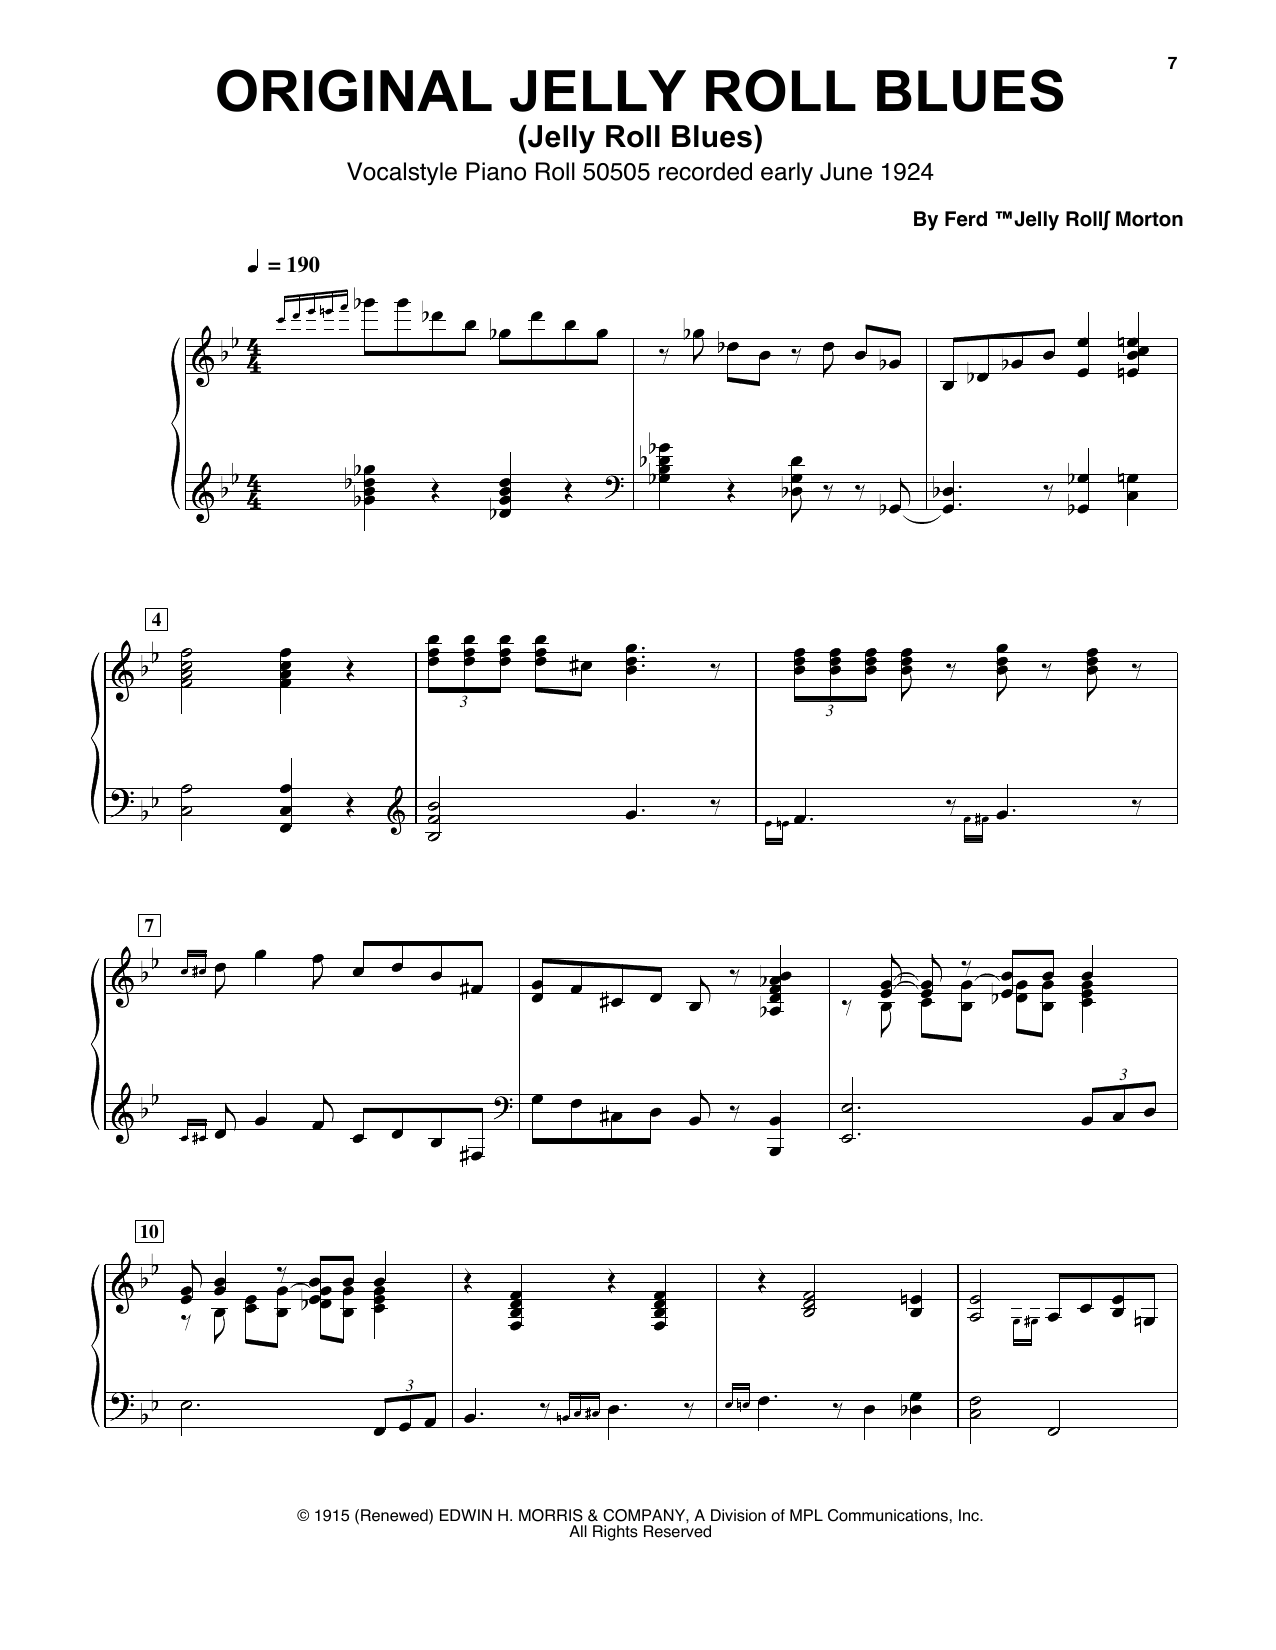 Download Jelly Roll Morton Jelly Roll Blues Sheet Music